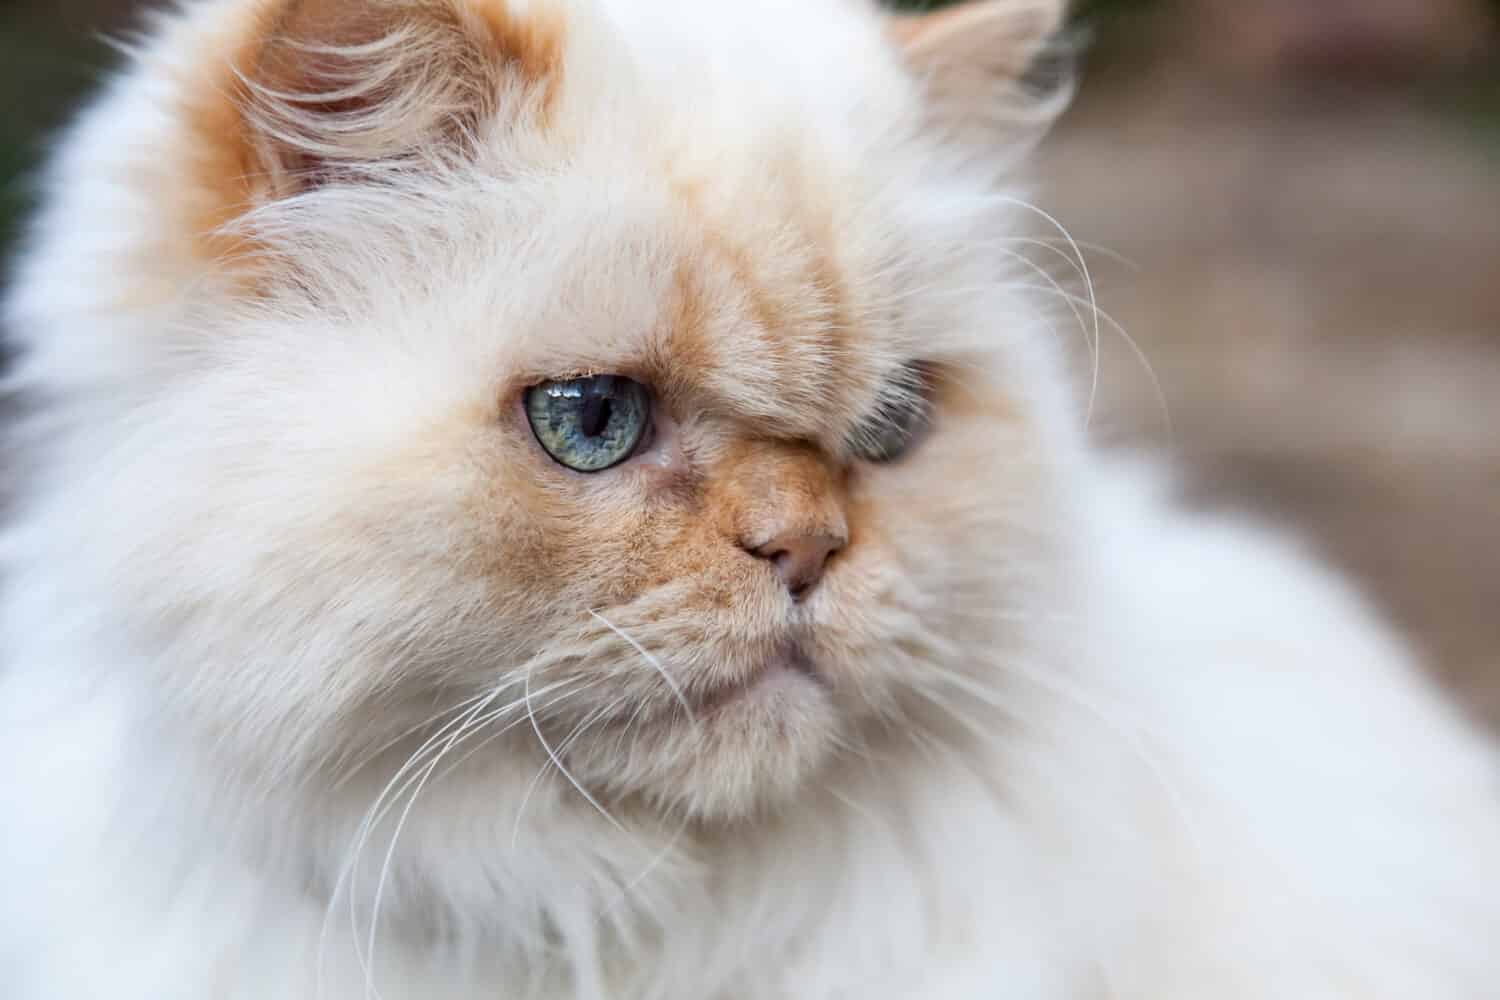 Himalayan cat close up of face and blue eyes. White fur with orange flame points. Selective focus with background blur